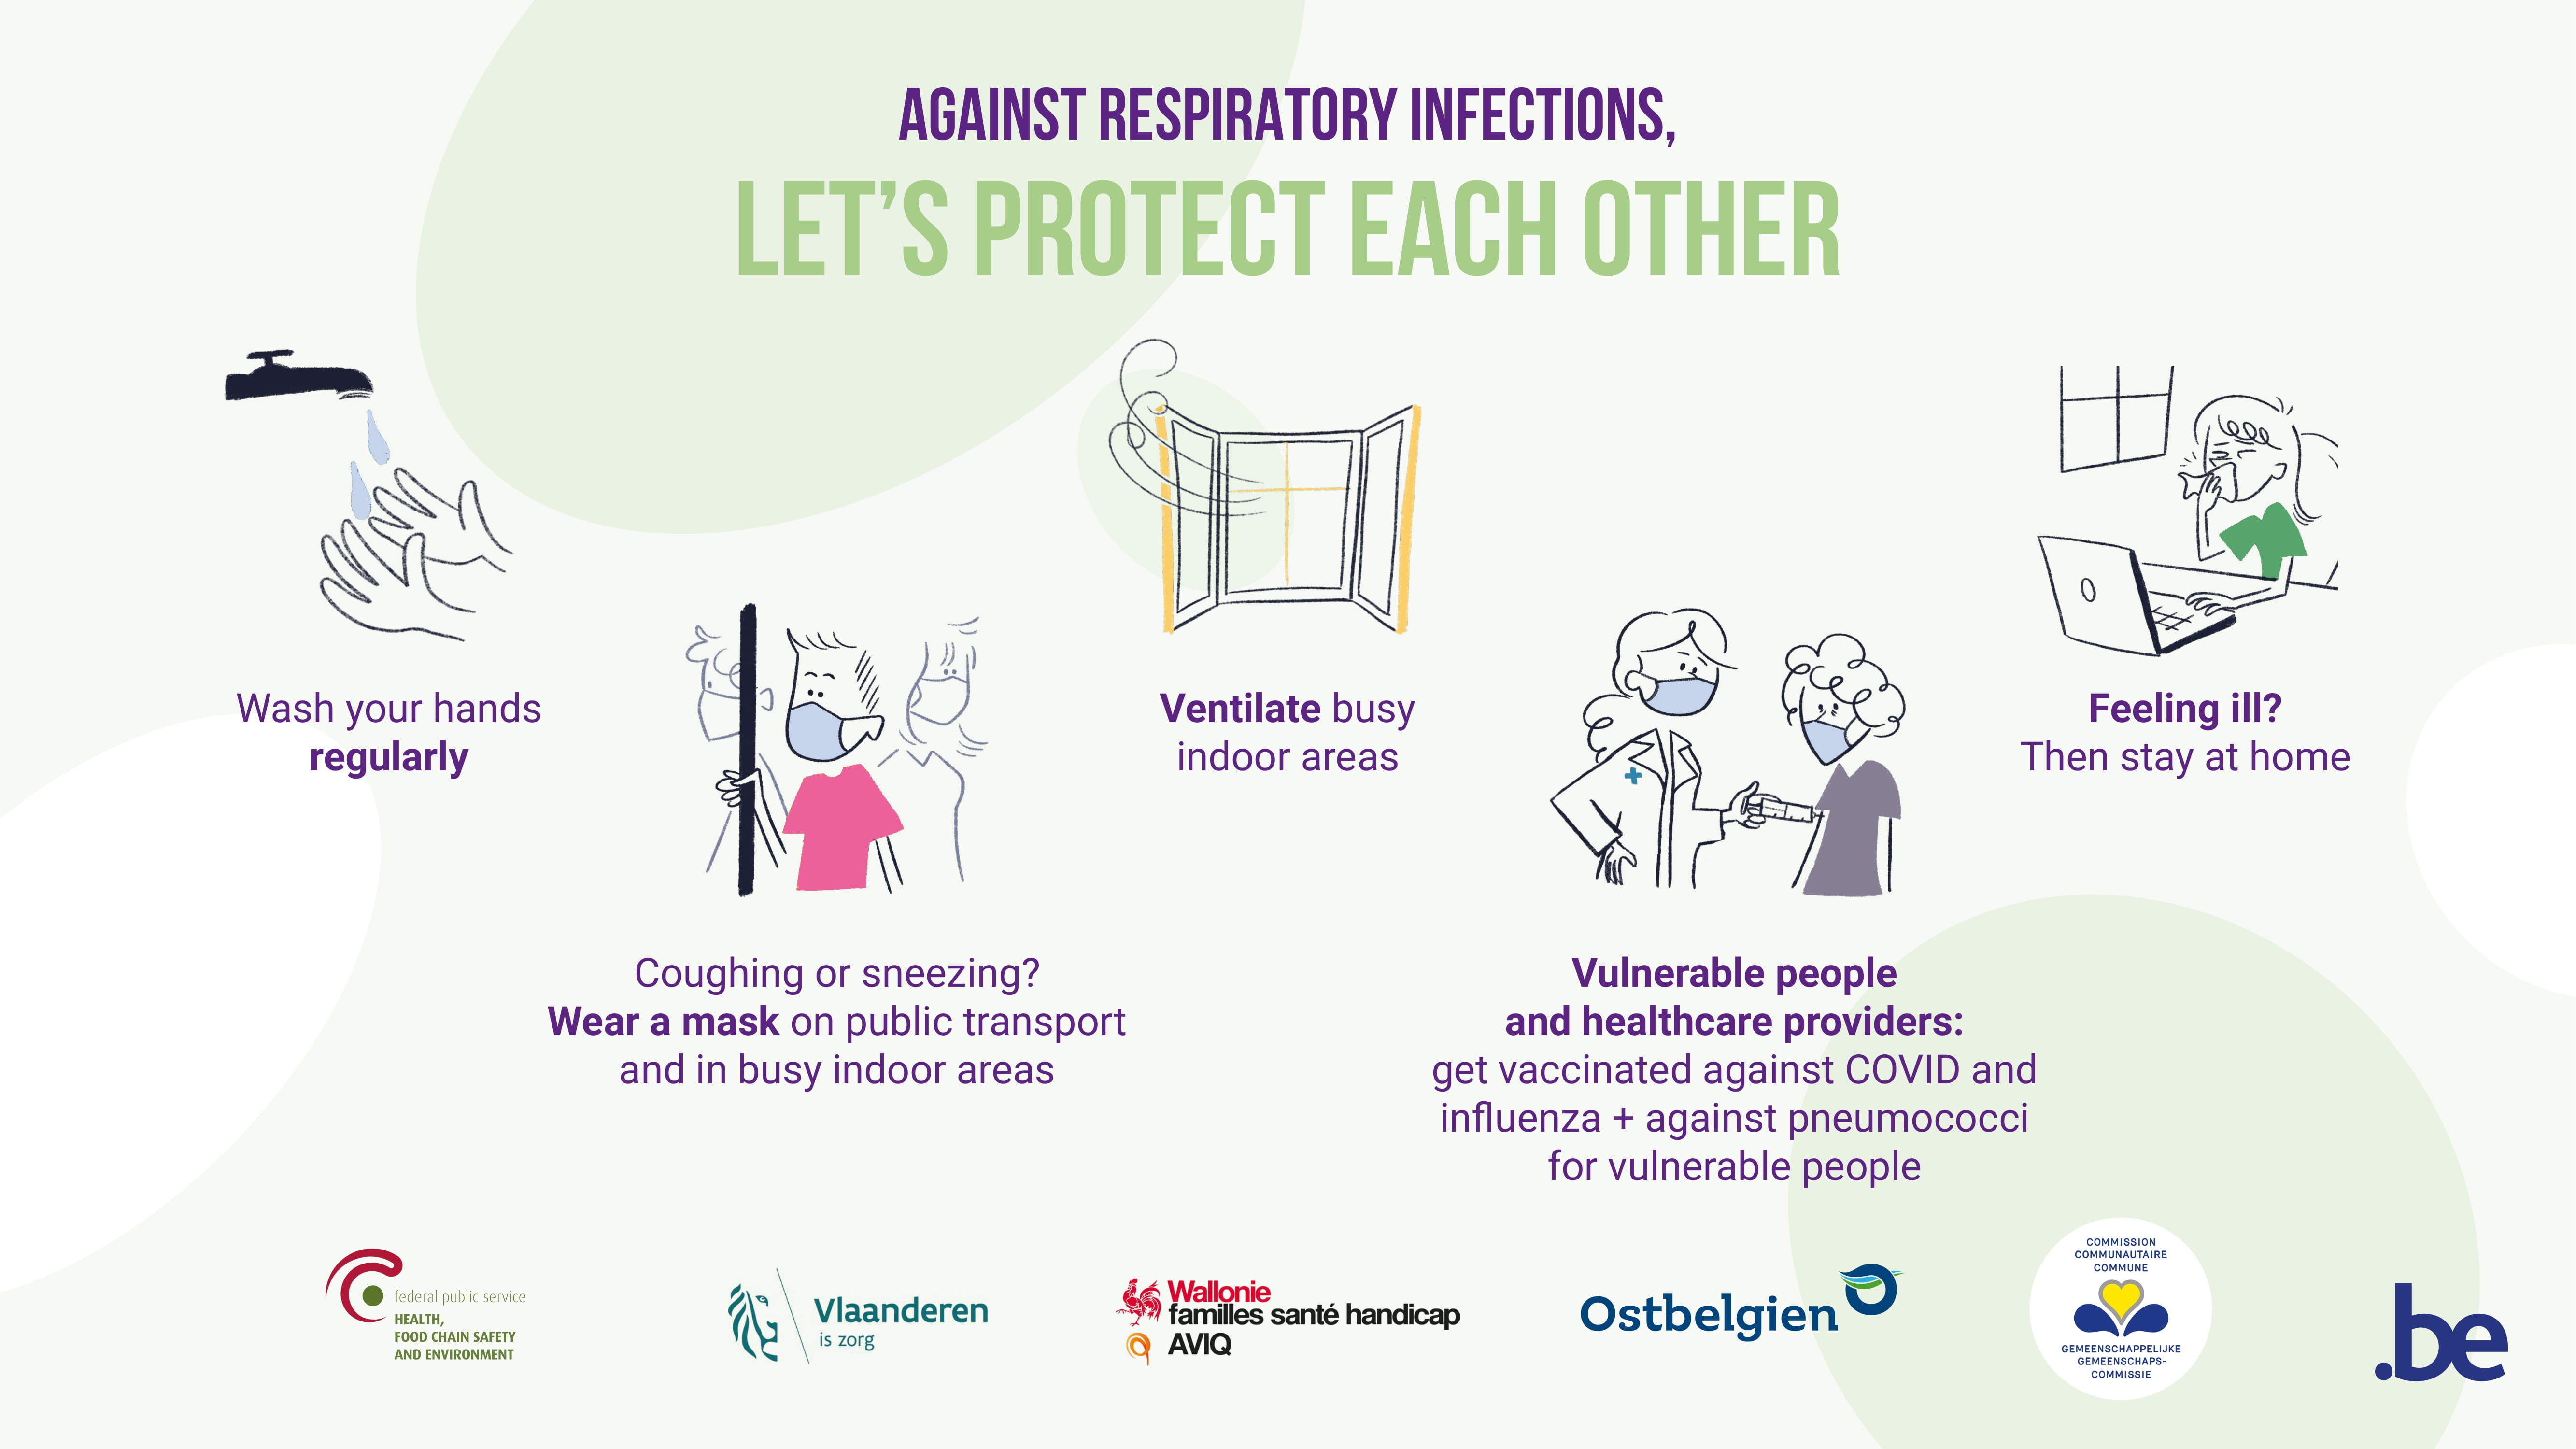 Let's protect eachother against respiratory infections.